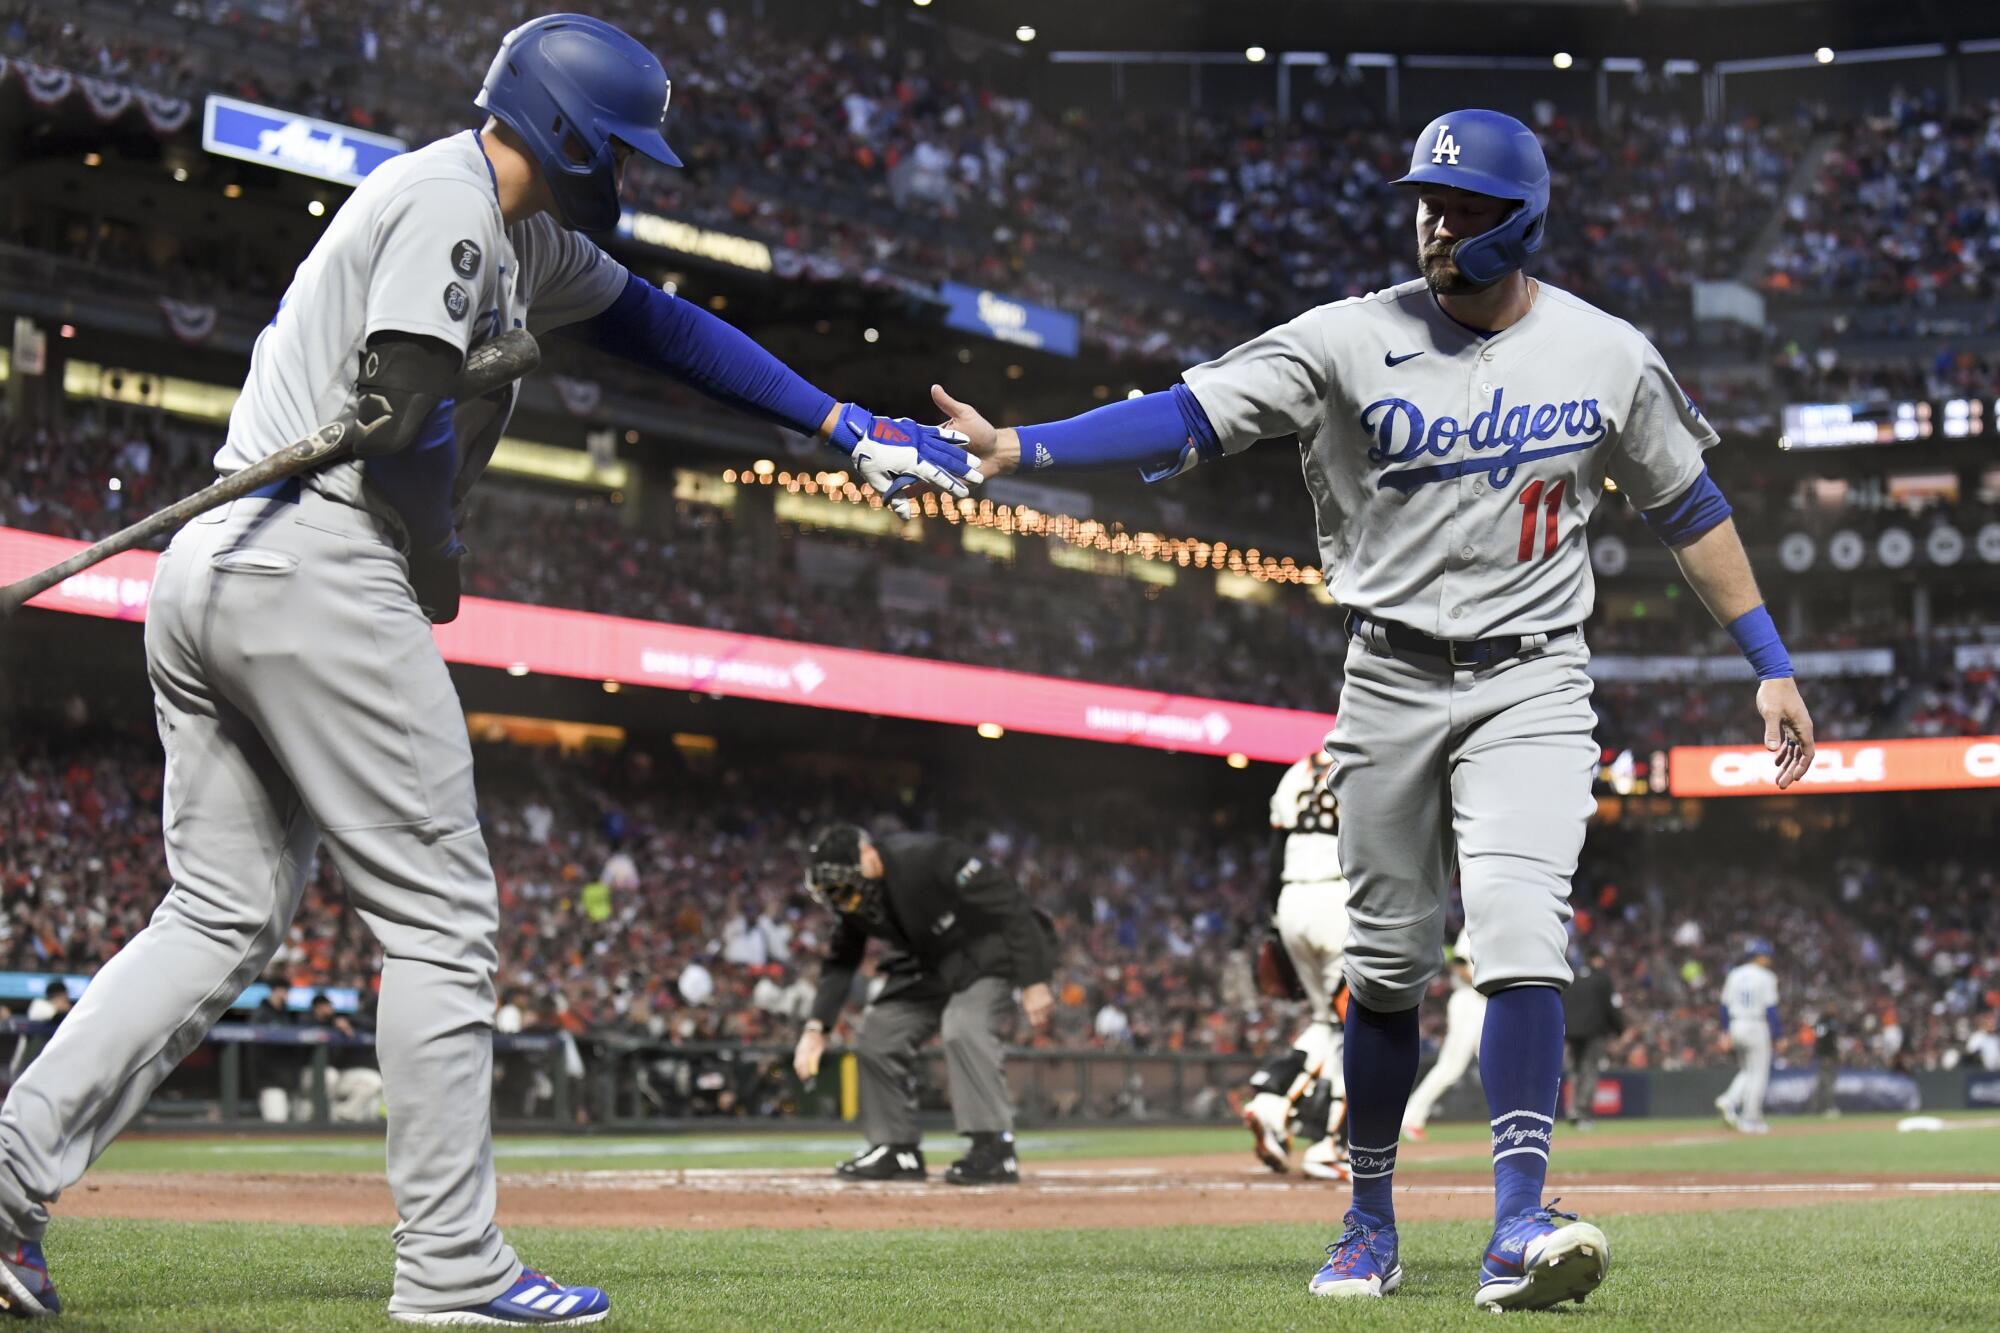  Dodgers' AJ Pollock, right, celebrates with Corey Seager after scoring.